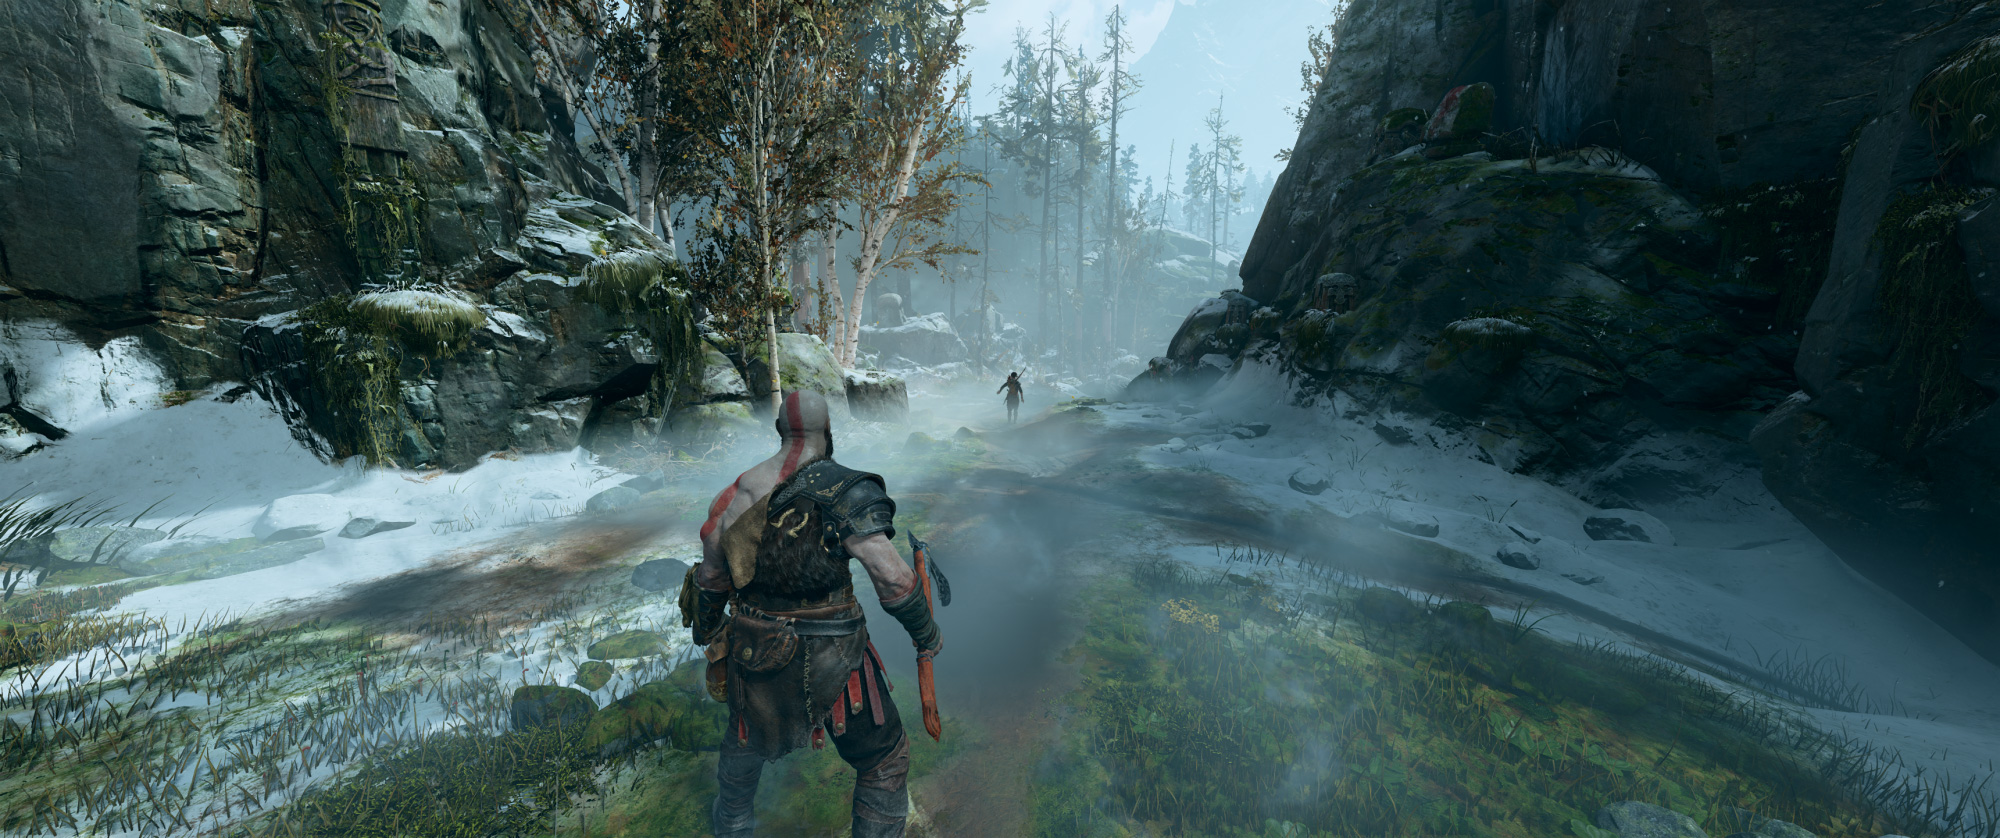 God of War - FOV Fix Using Flawless Widescreen Application - Comparison Images - 6E85AD2